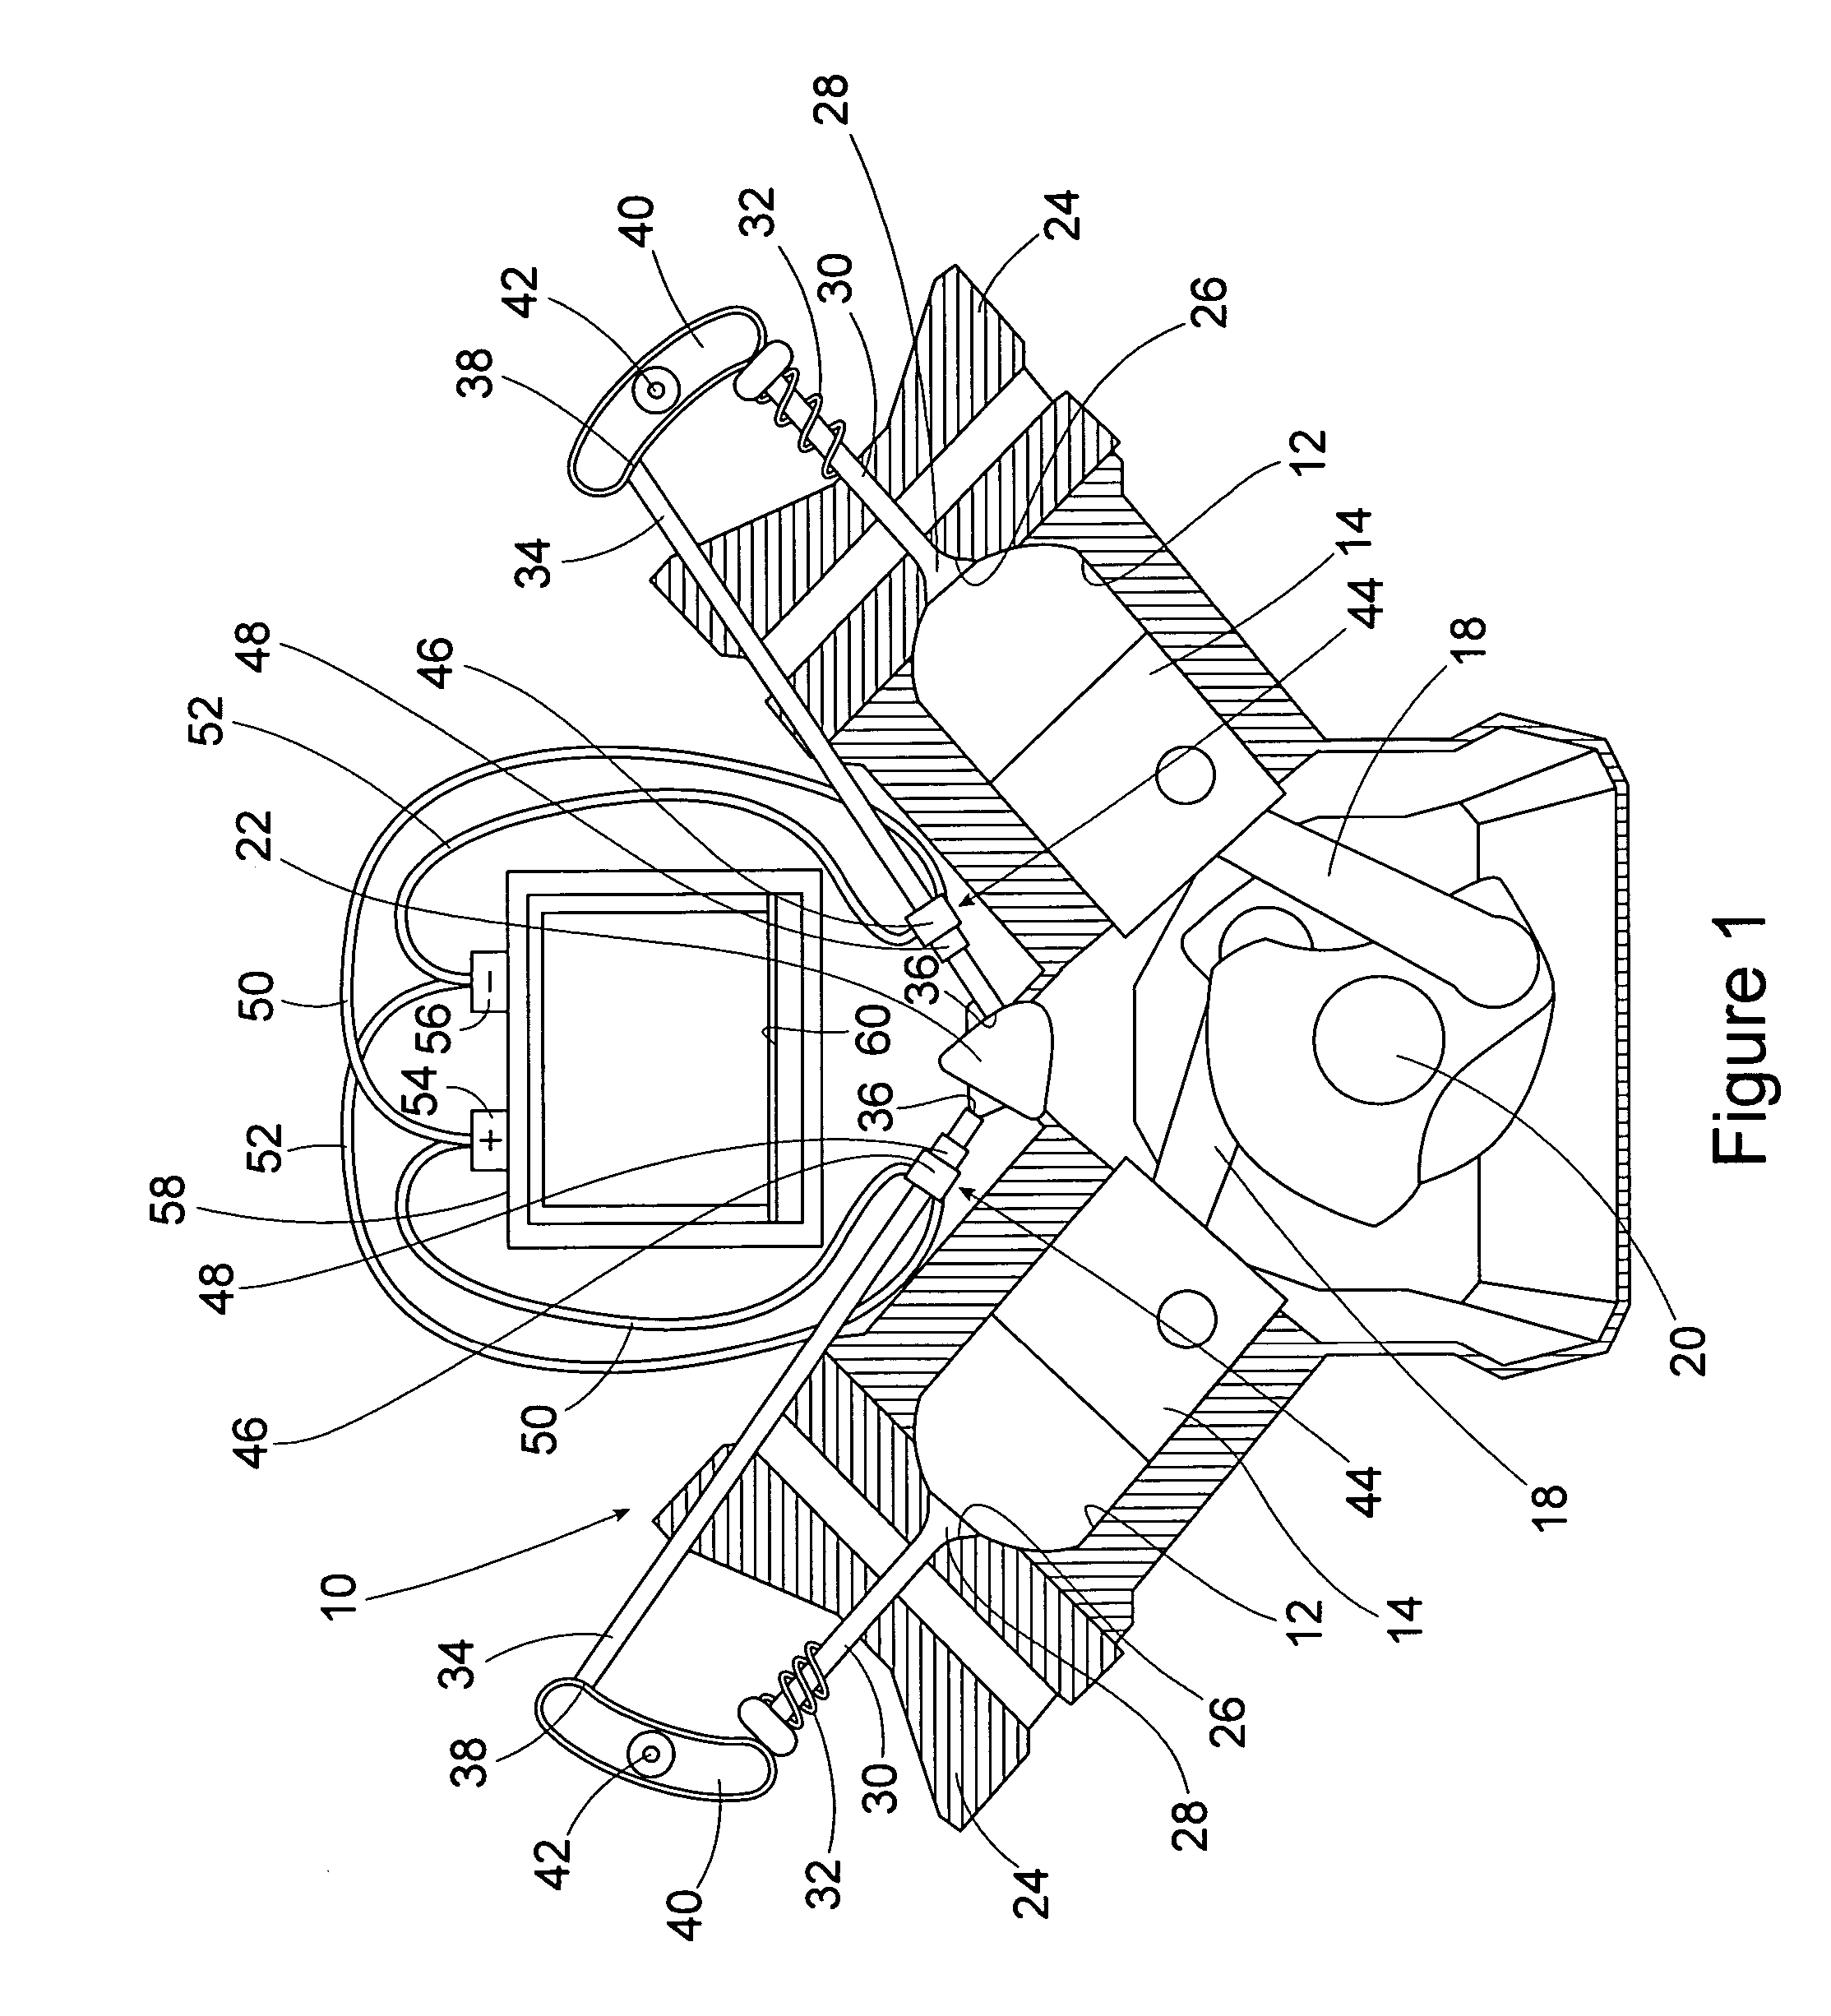 Combustion engine driven electric generator apparatus